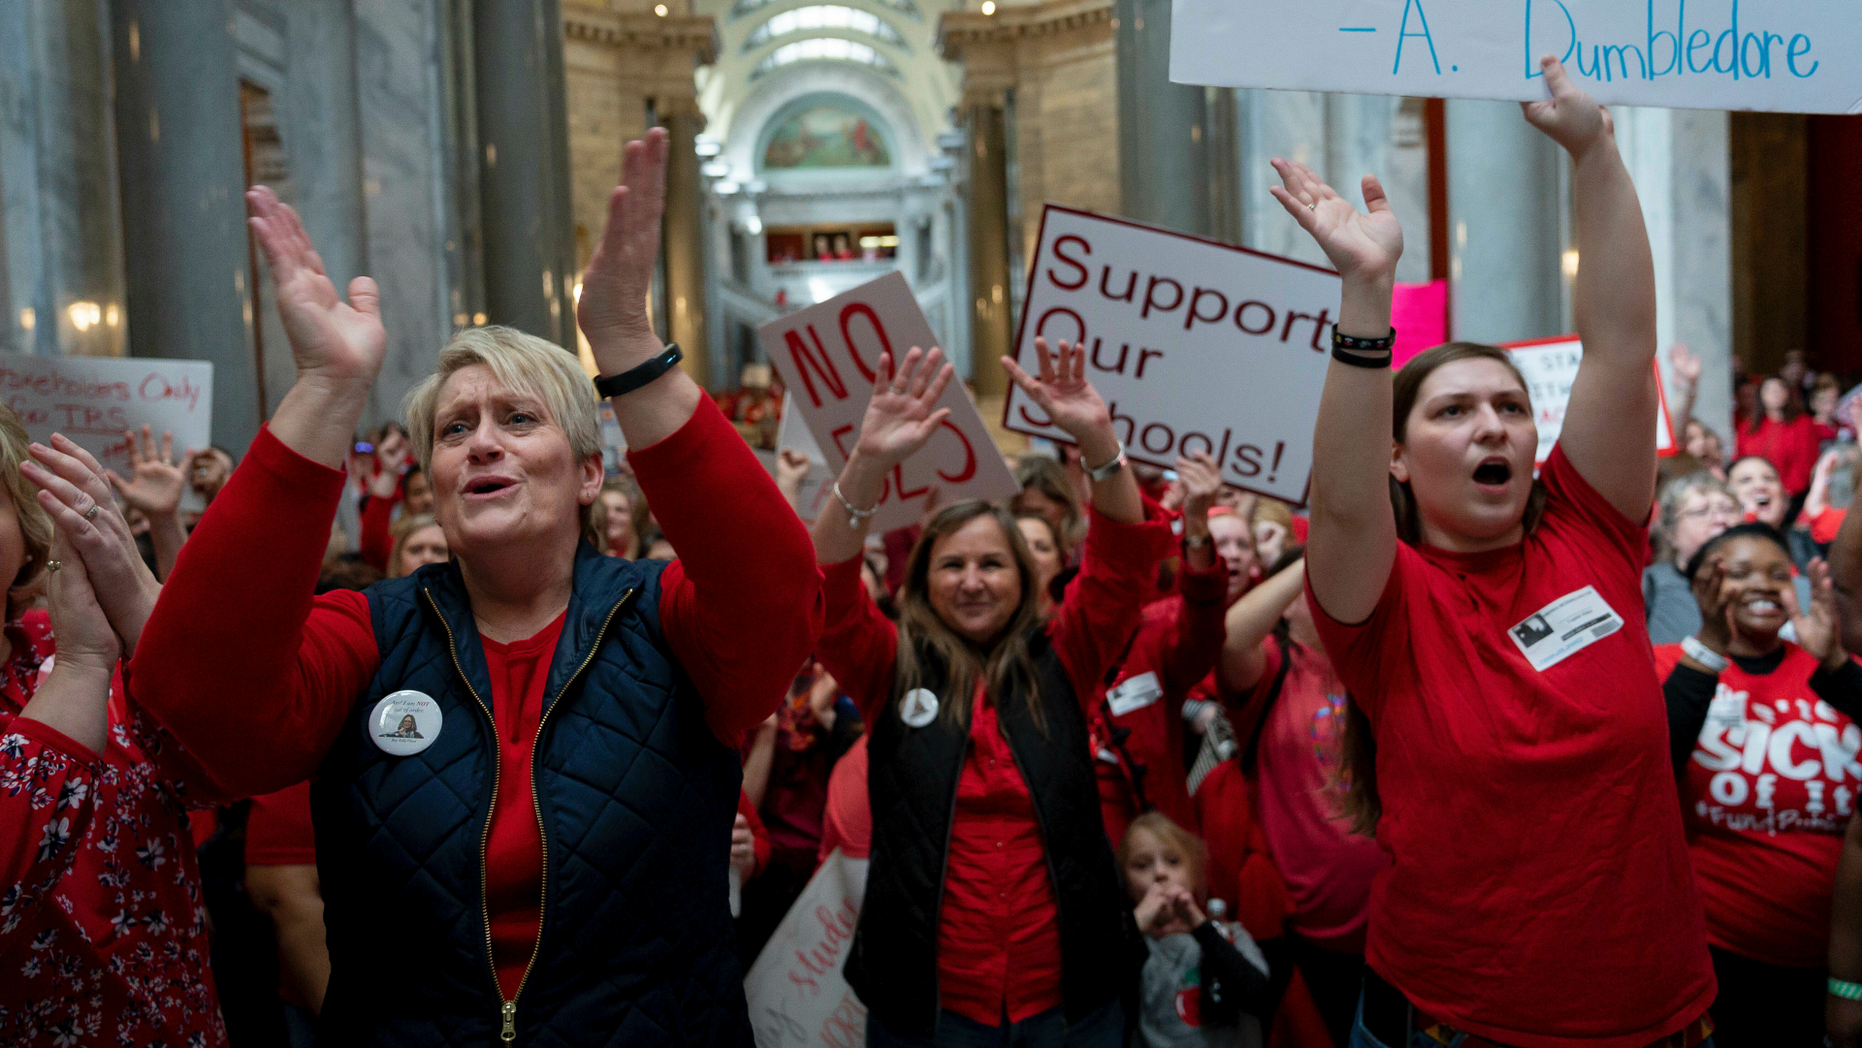 A group of several hundred teachers gathered to protest alleged attacks on public education at Capitol Hill, in Frankfort, Kentucky on Tuesday, March 12, 2019. (AP Photo / Bryan Woolston)